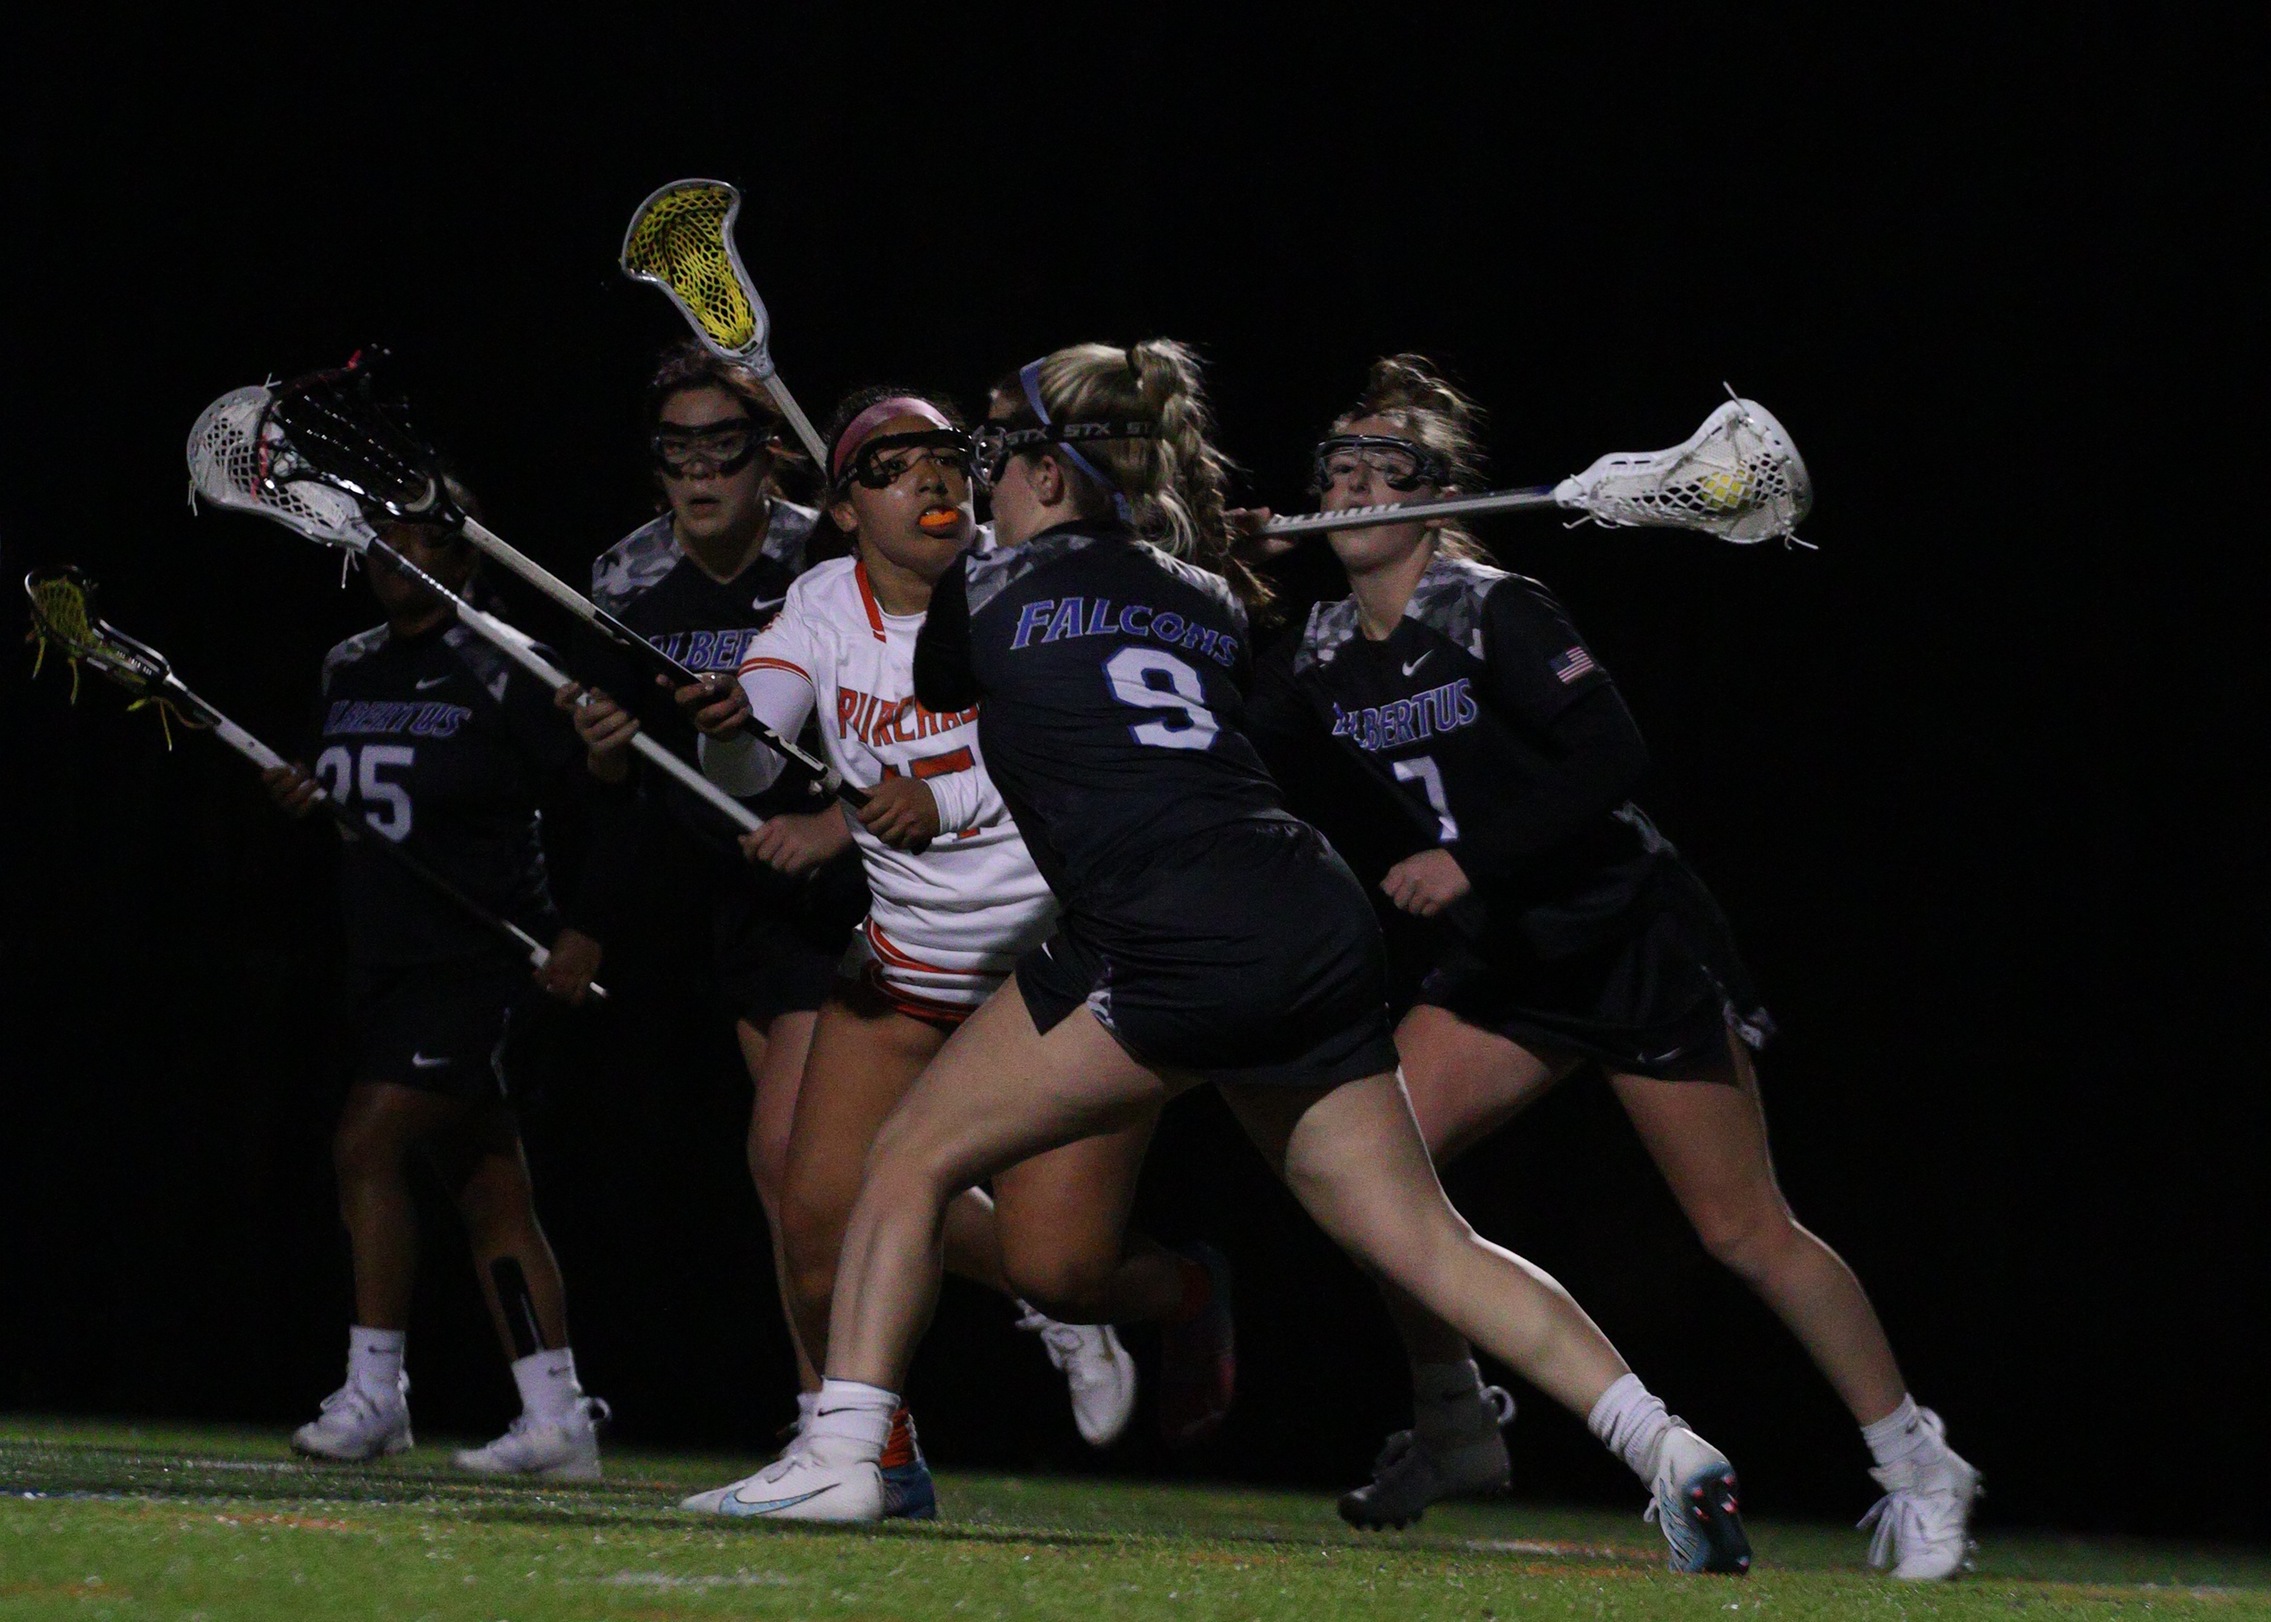 Three Players Score, But Women's Lacrosse Falls To Purchase